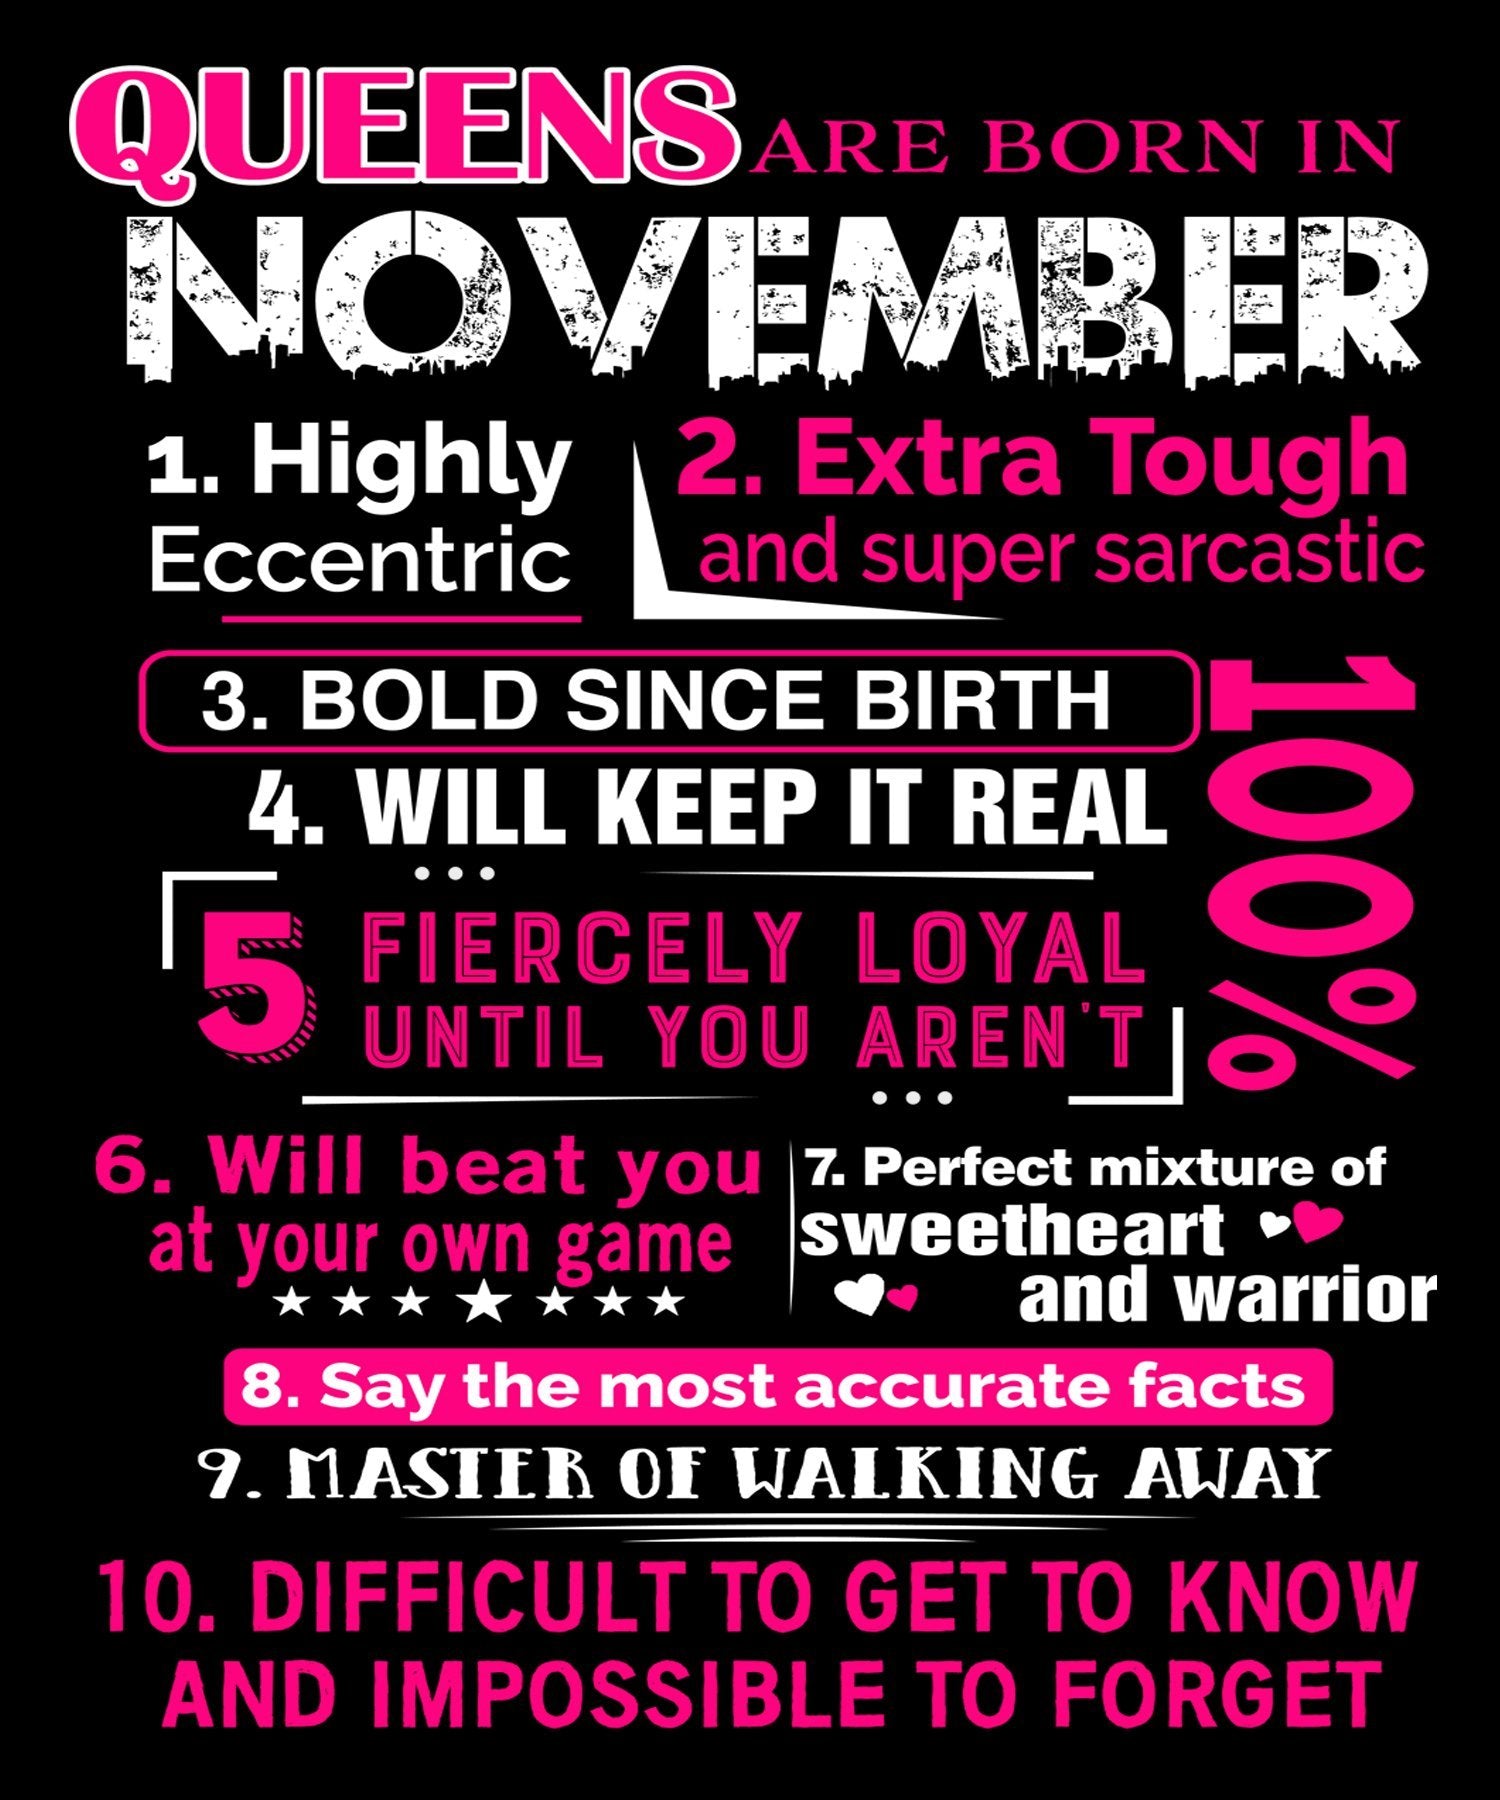 "Queens Are Born In November 10 Reasons"